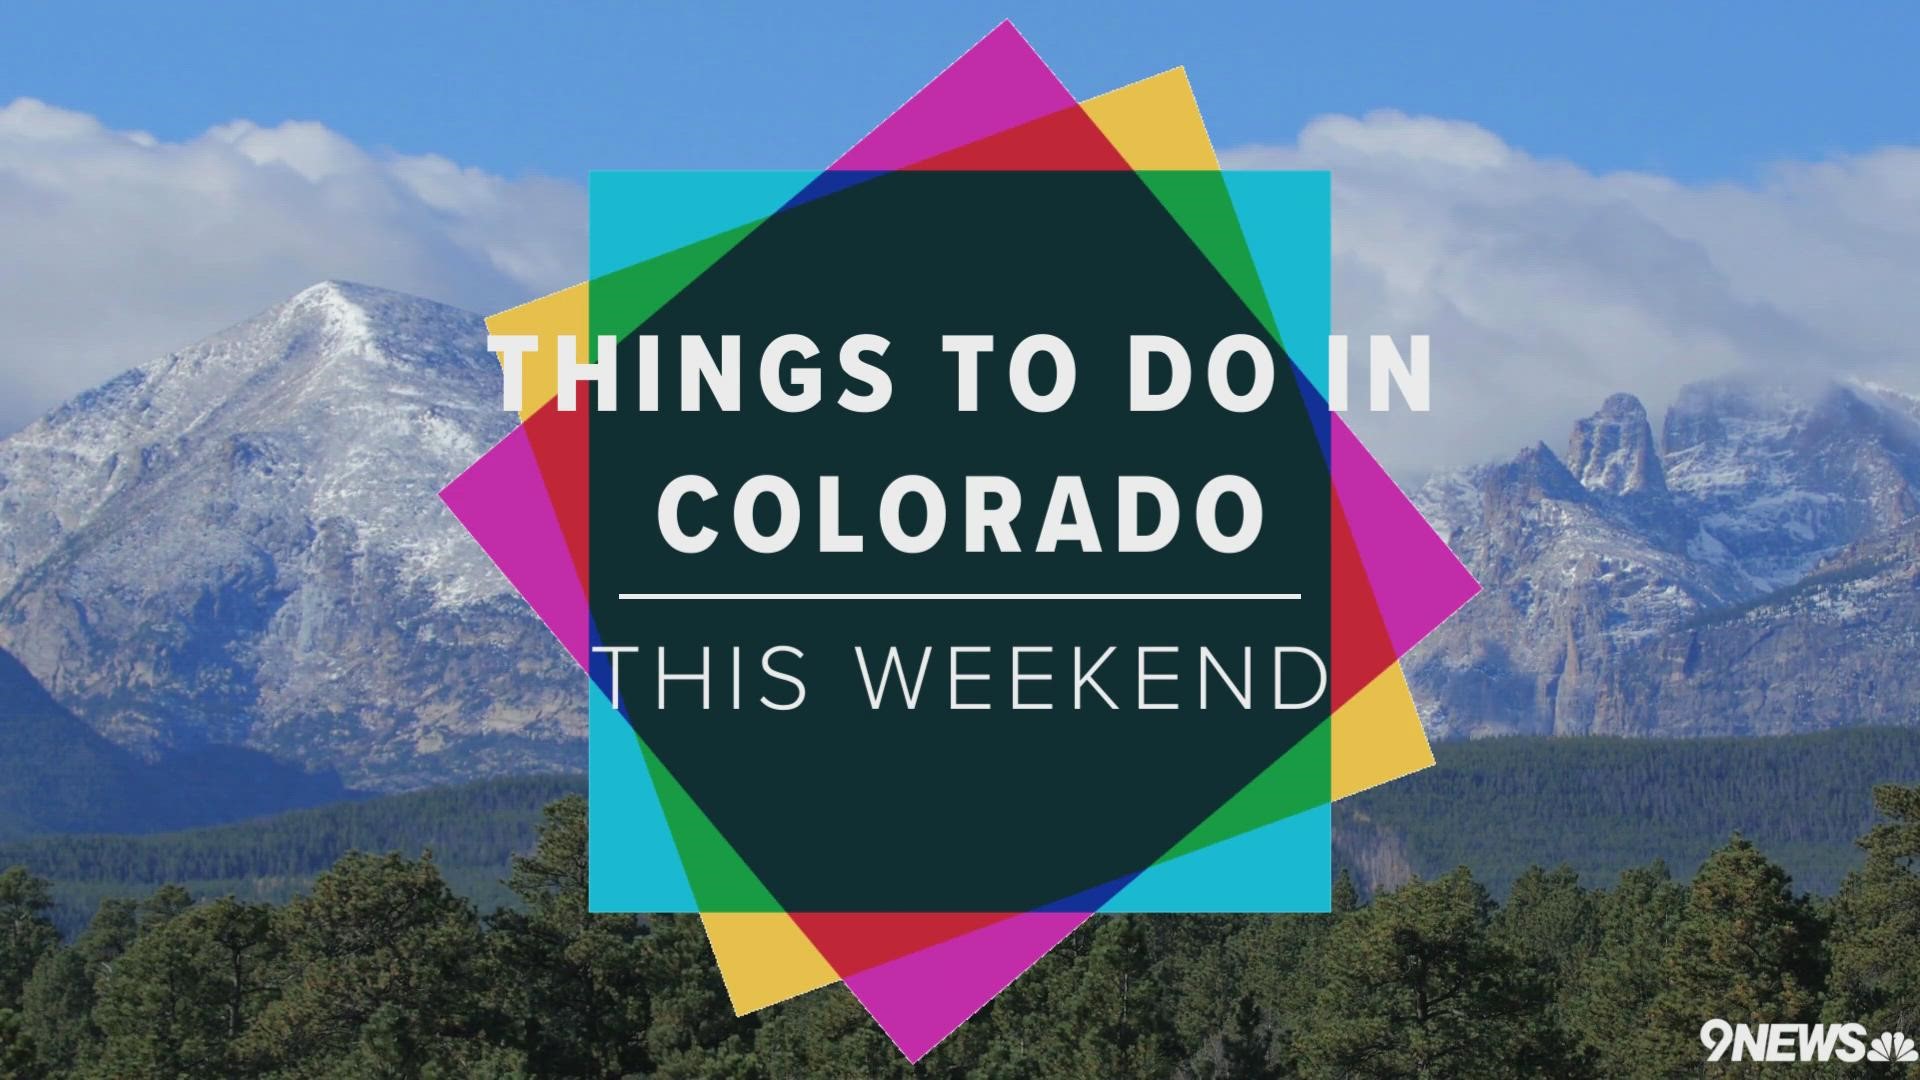 With holiday lightings, craft fairs, dinosaurs and football, there's so much to do in Denver and Colorado this autumn weekend.